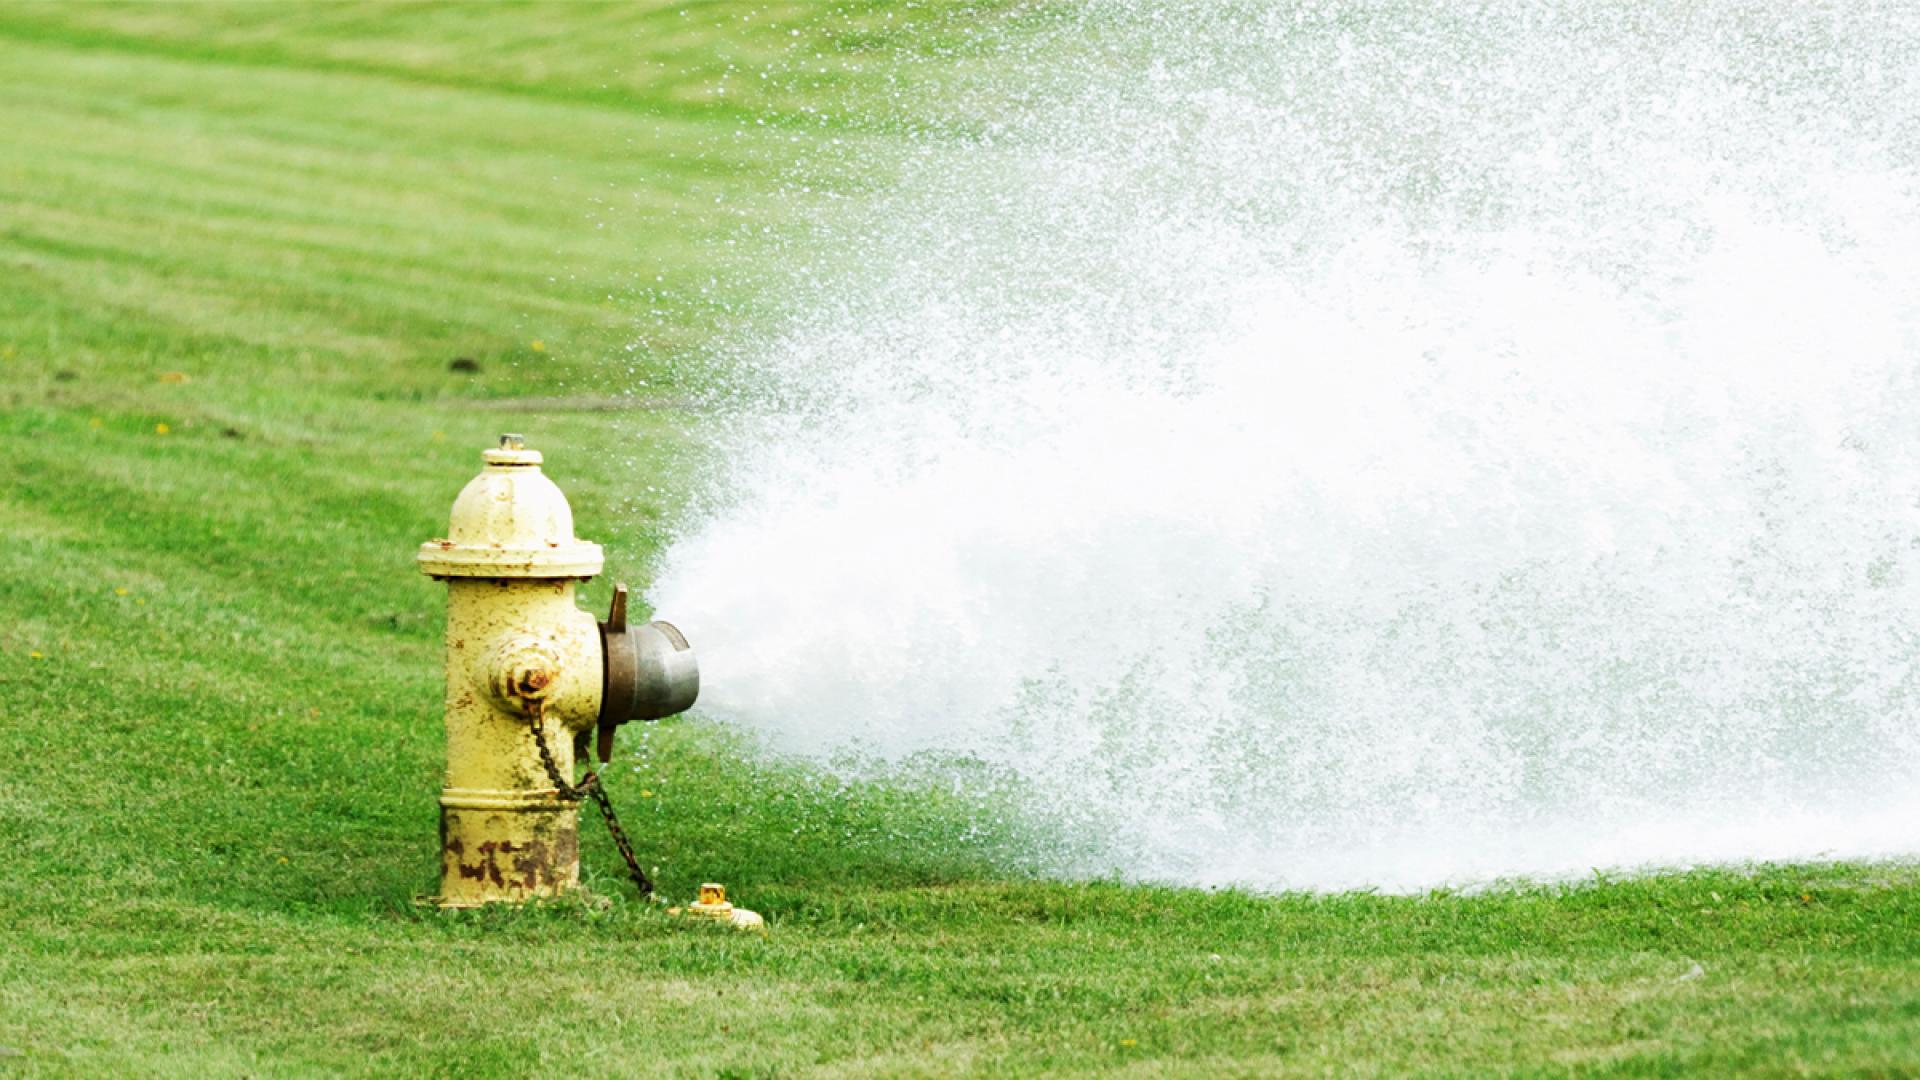 water flushing from yellow fire hydrant